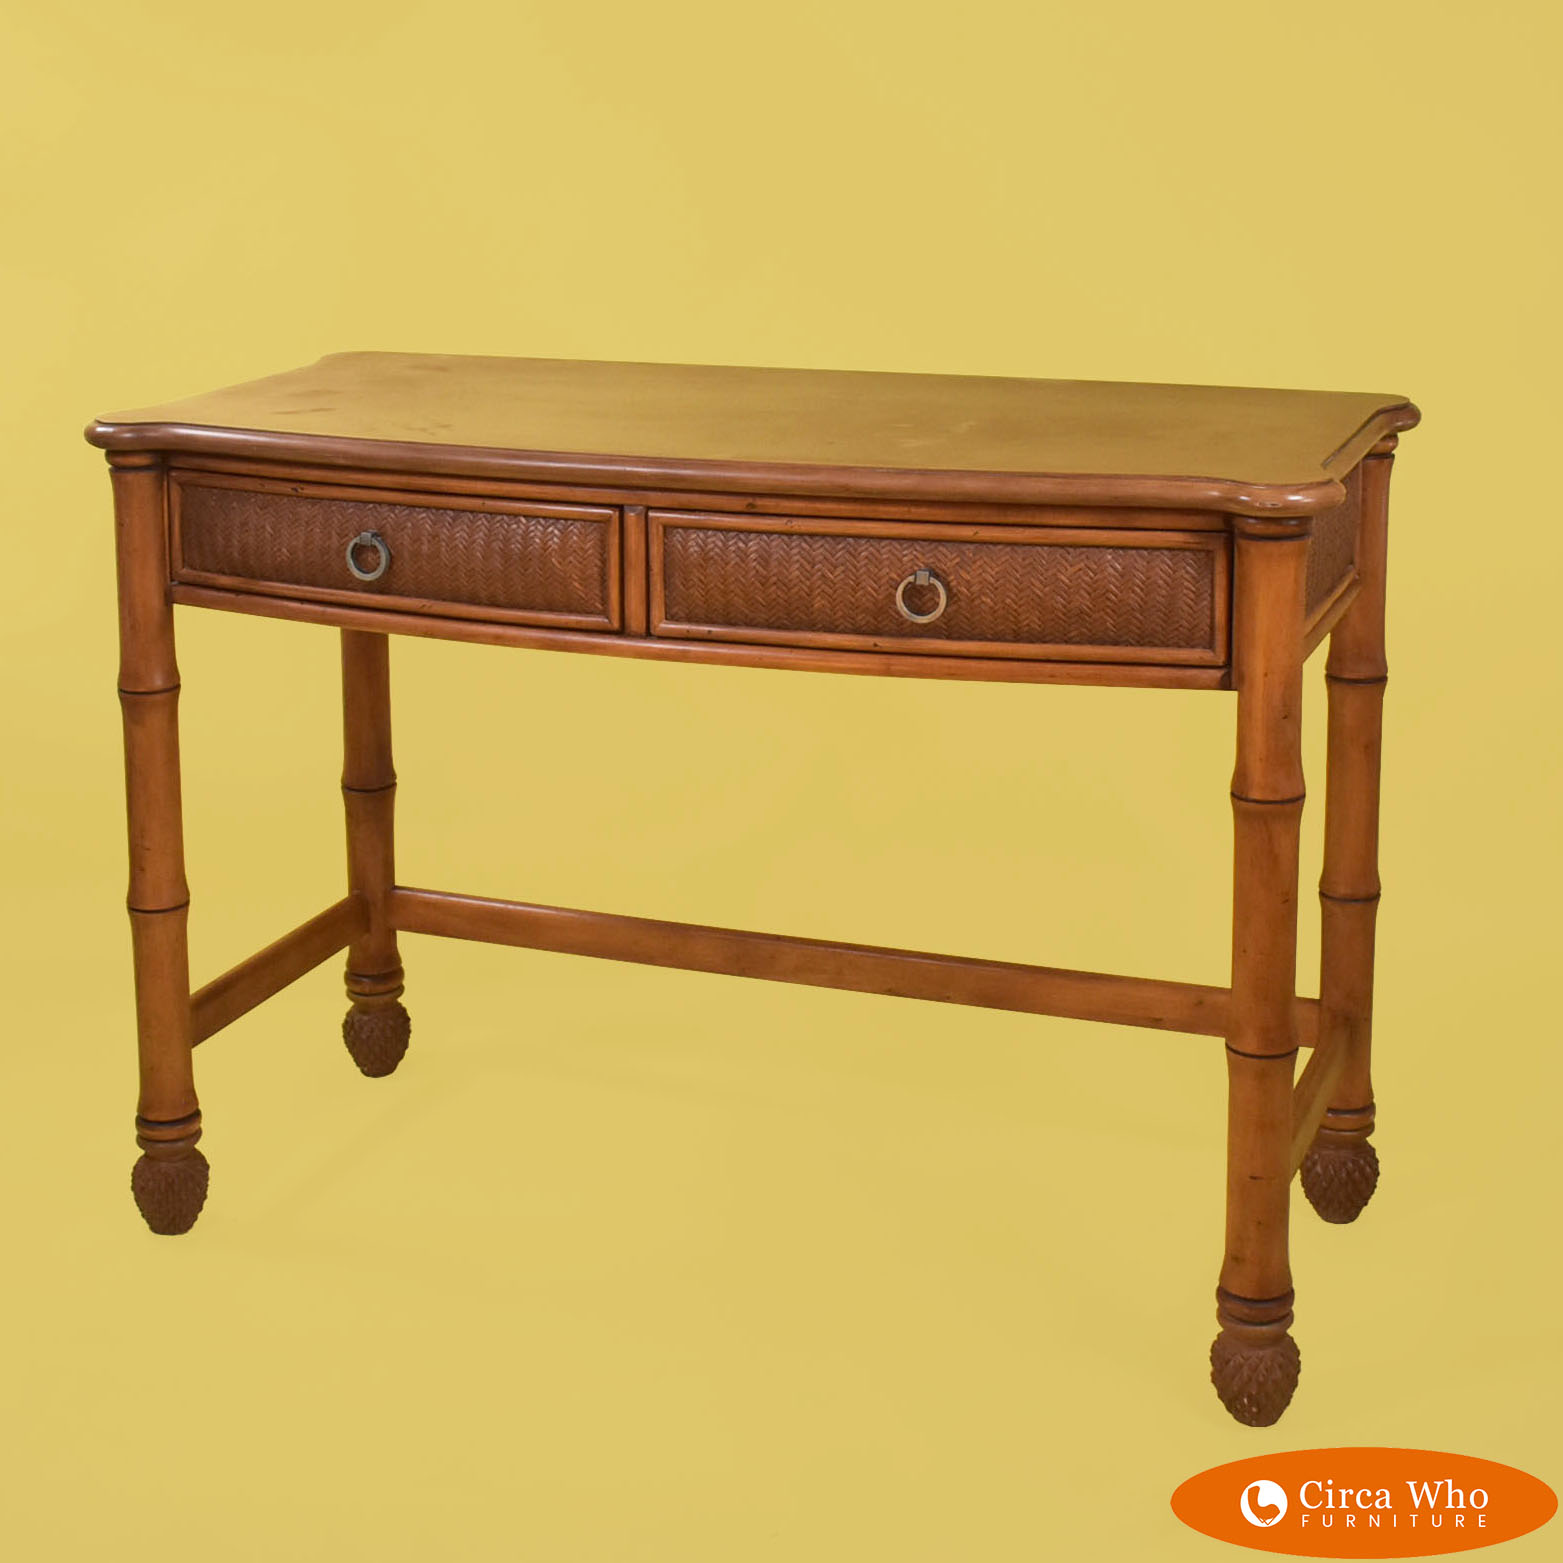 Faux Bamboo Woven Rattan Vanity Desk, Faux Bamboo Vanity